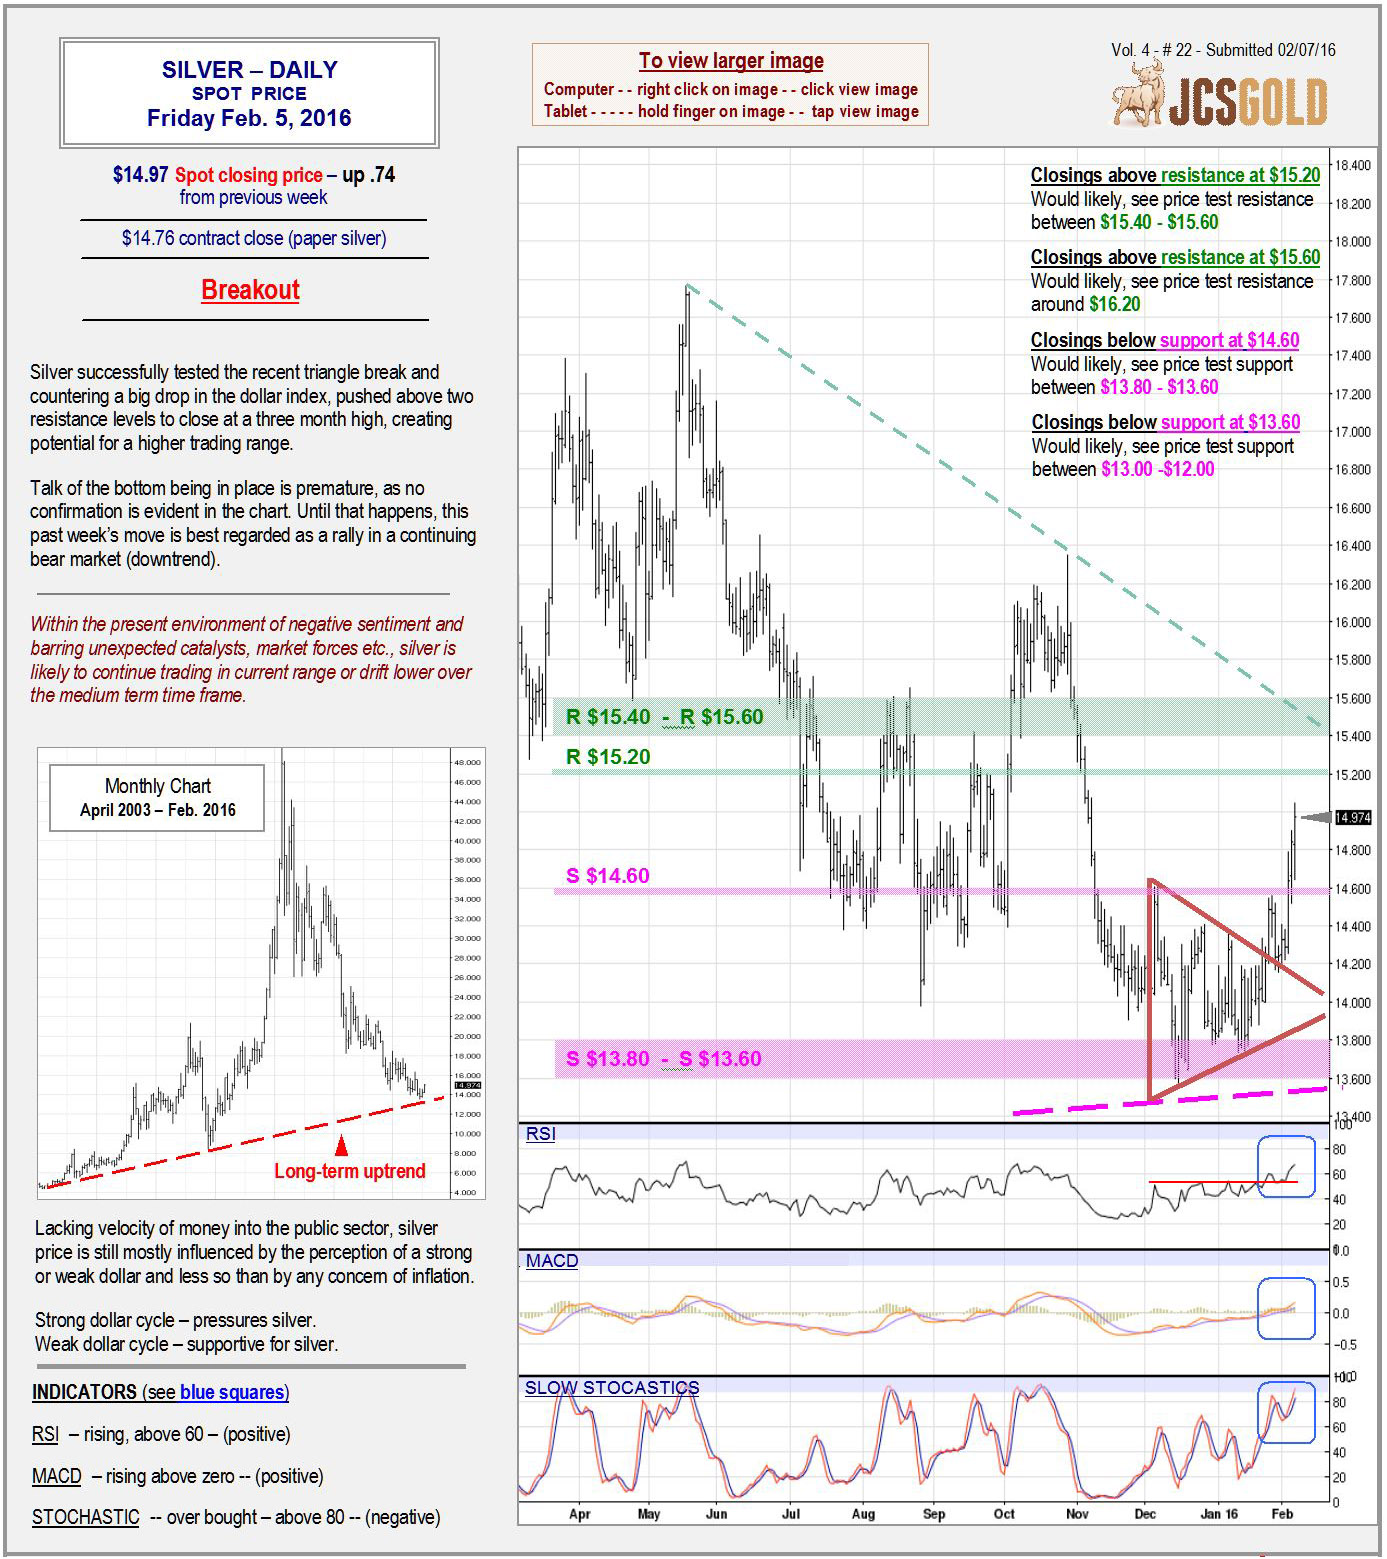 Feb 5, 2016 chart & commentary copy